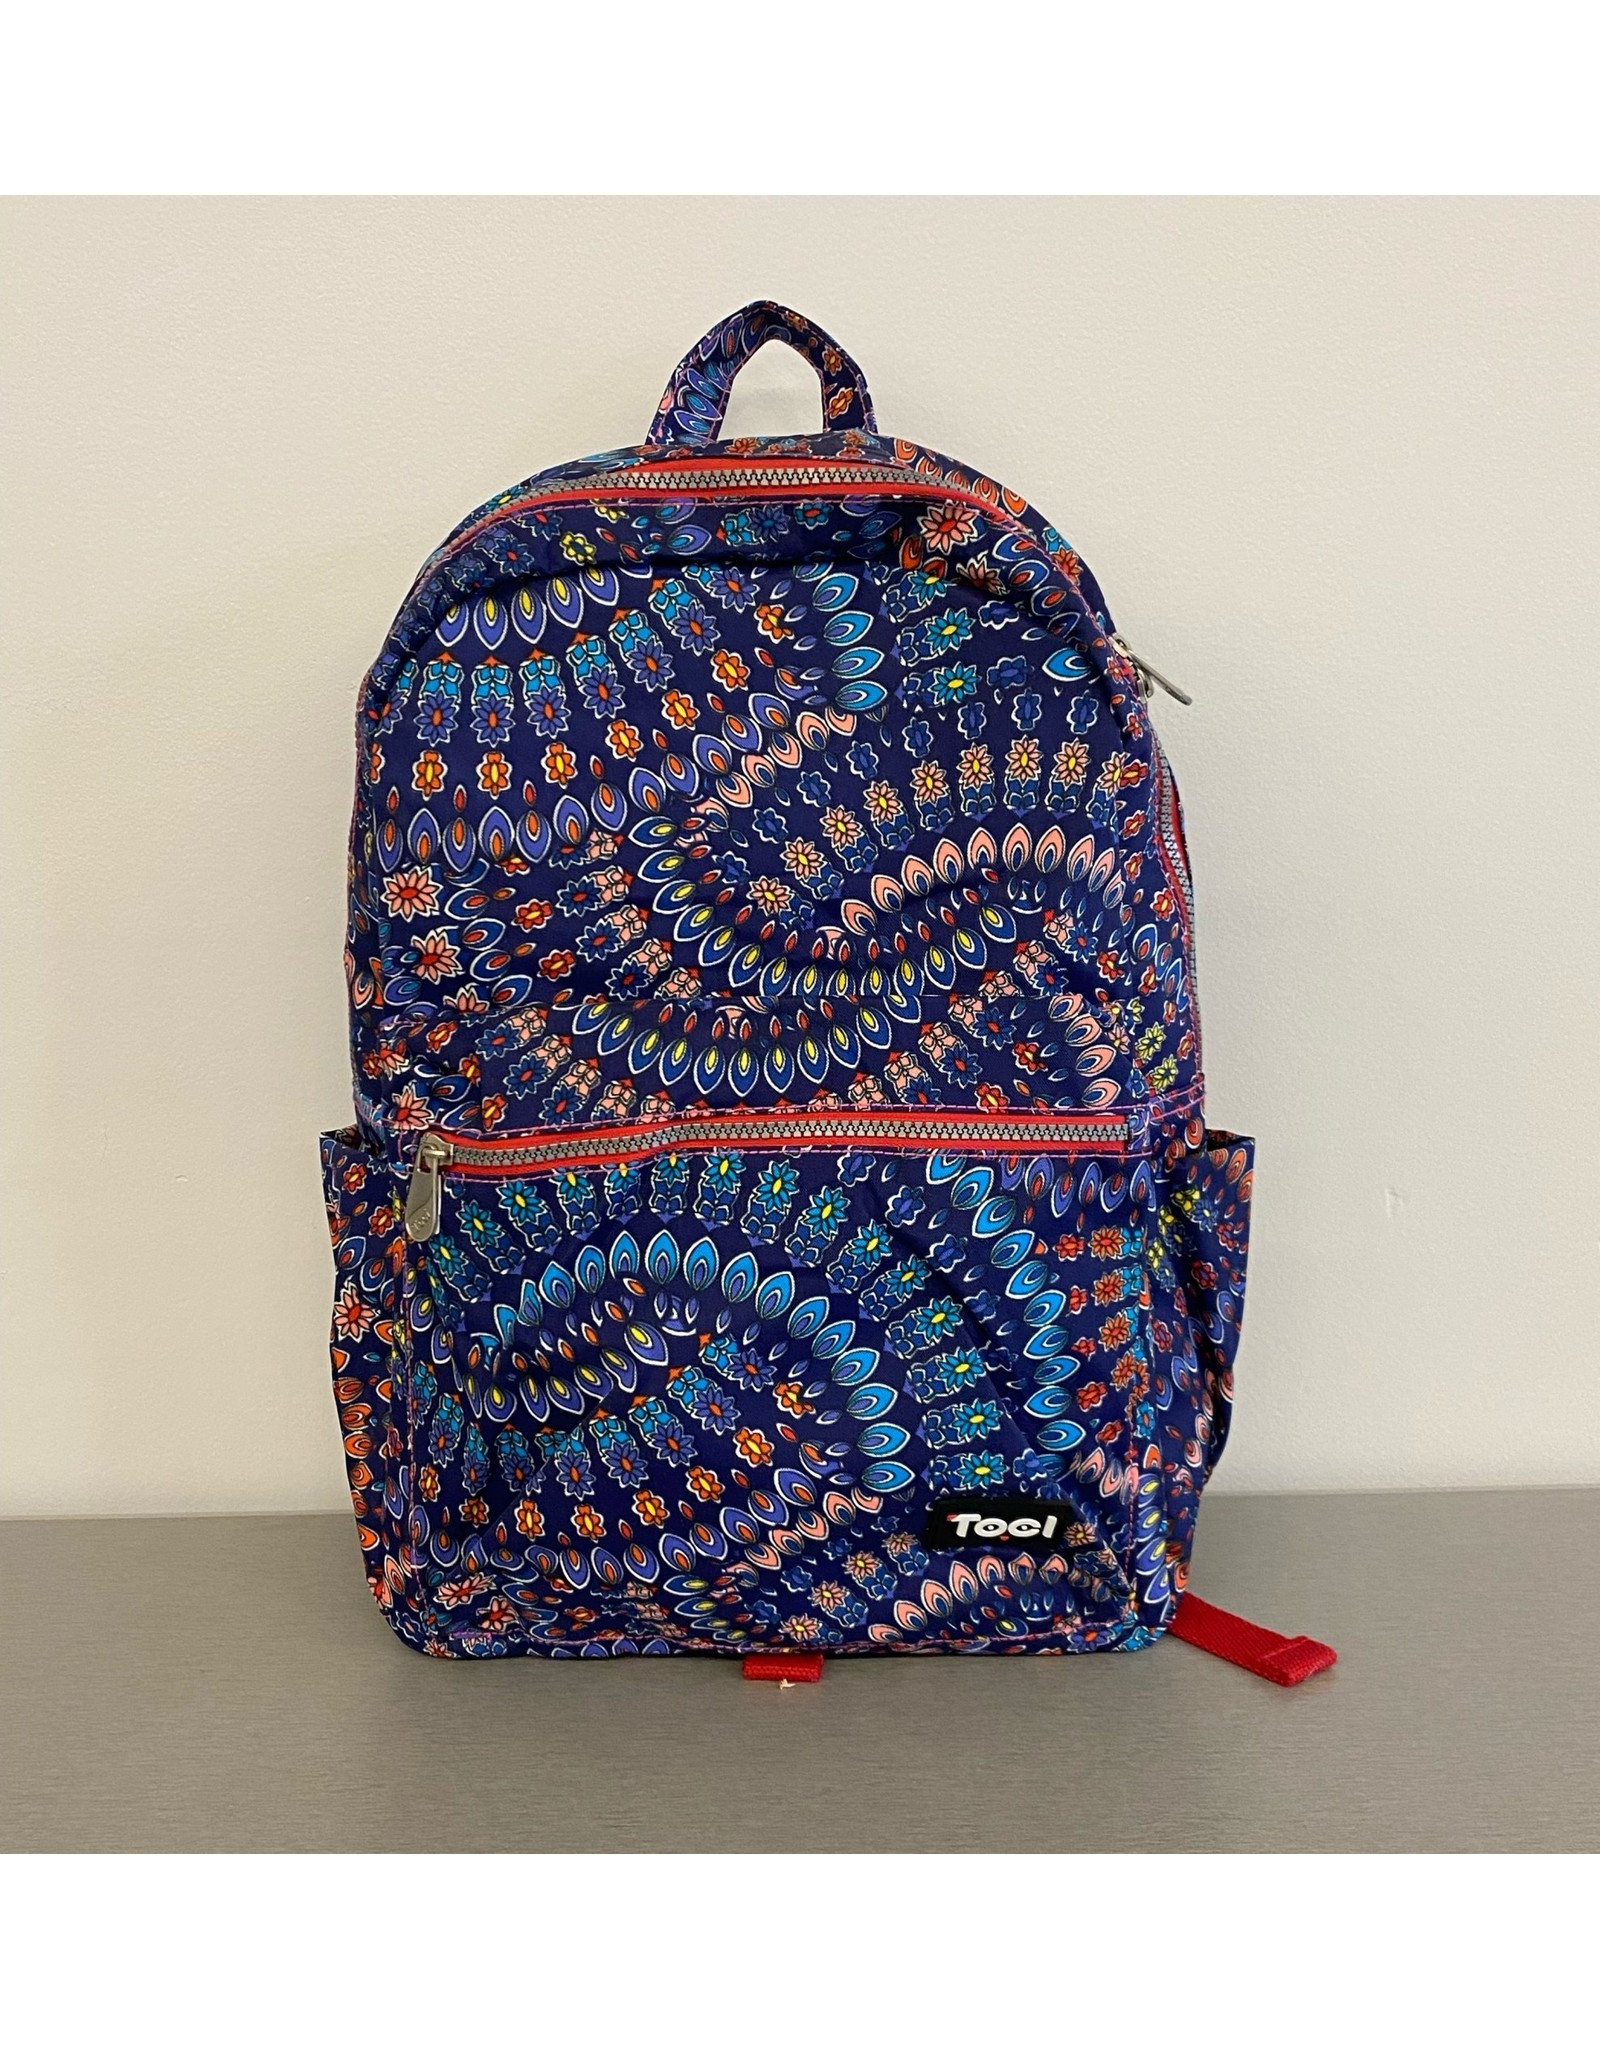 Toci - Purple Patterned Backpack